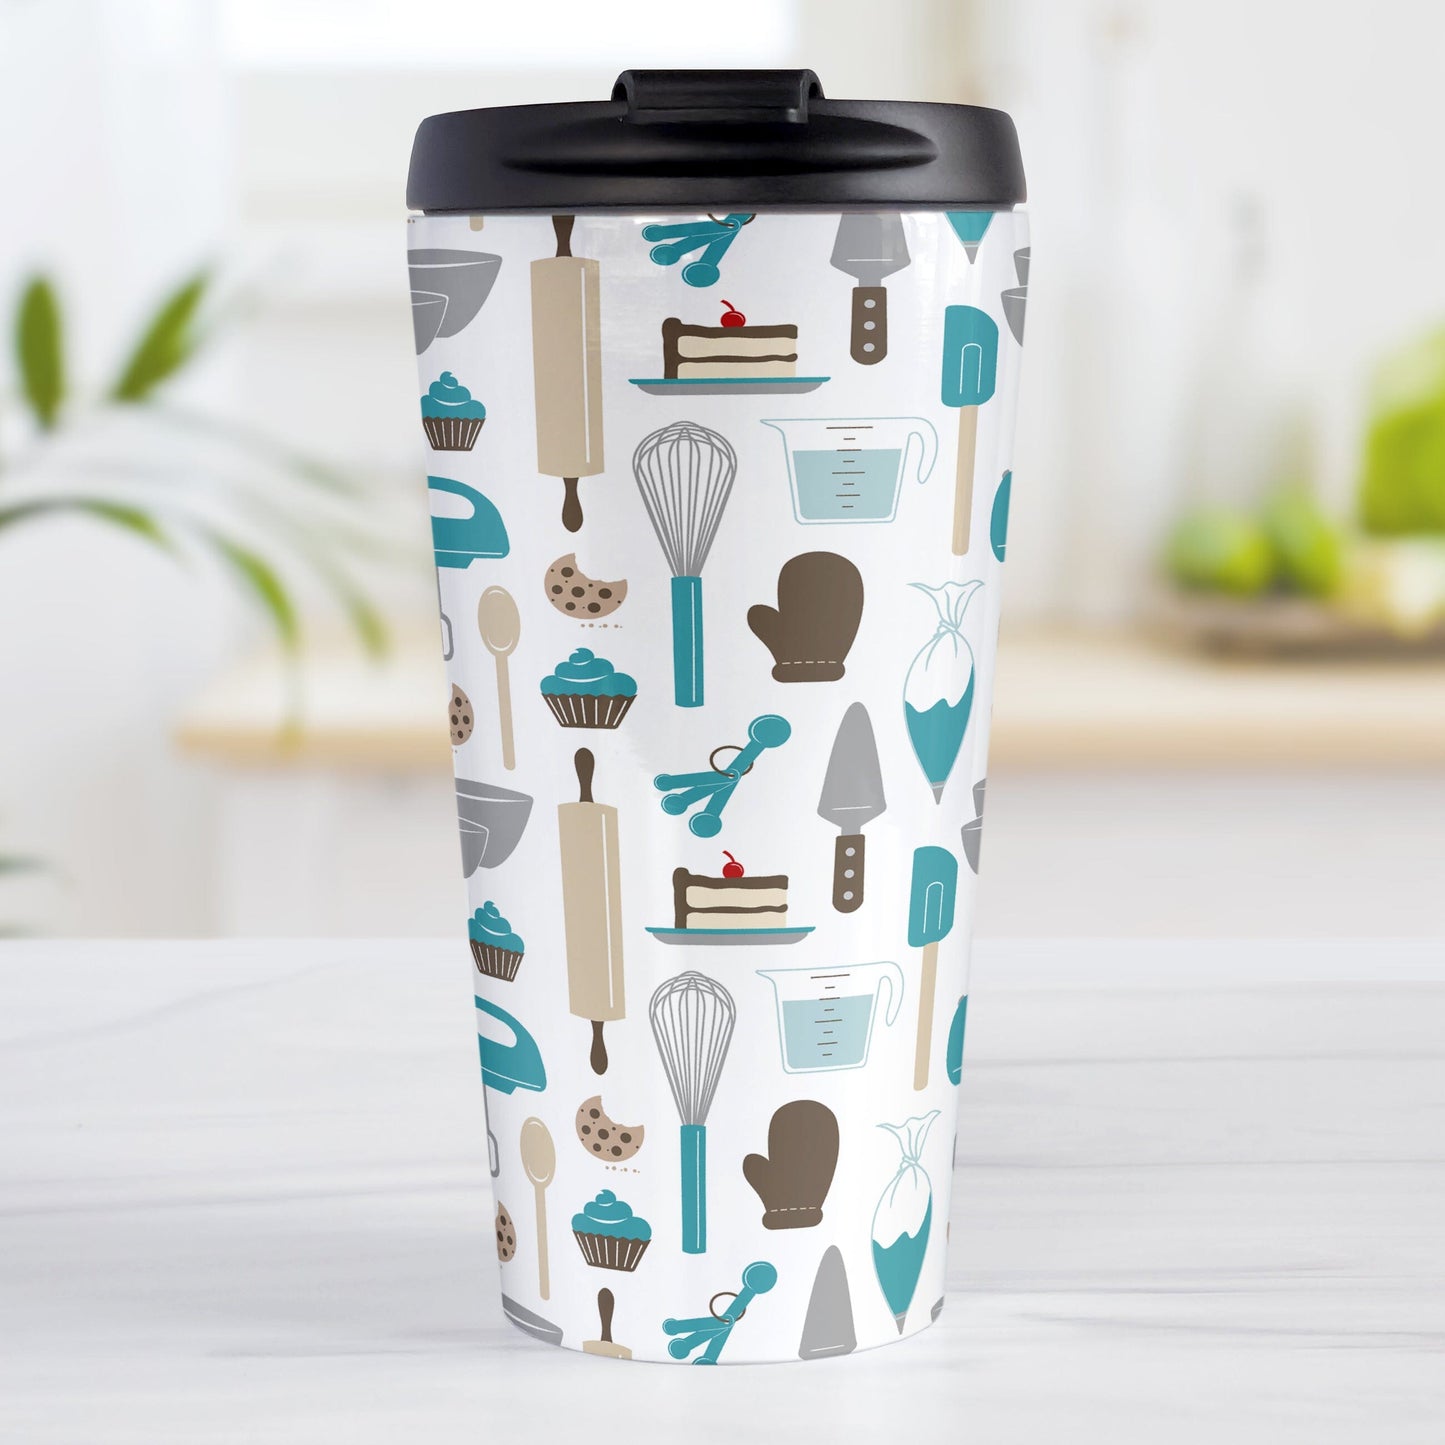 Turquoise Baking Pattern Travel Mug (15oz) at Amy's Coffee Mugs. A stainless steel travel mug designed with a pattern of baking tools like spatulas, whisks, mixers, bowls, and spoons, with cookies, cupcakes, and cake all in a turquoise, gray, brown, and beige color scheme that wraps around the travel mug. 